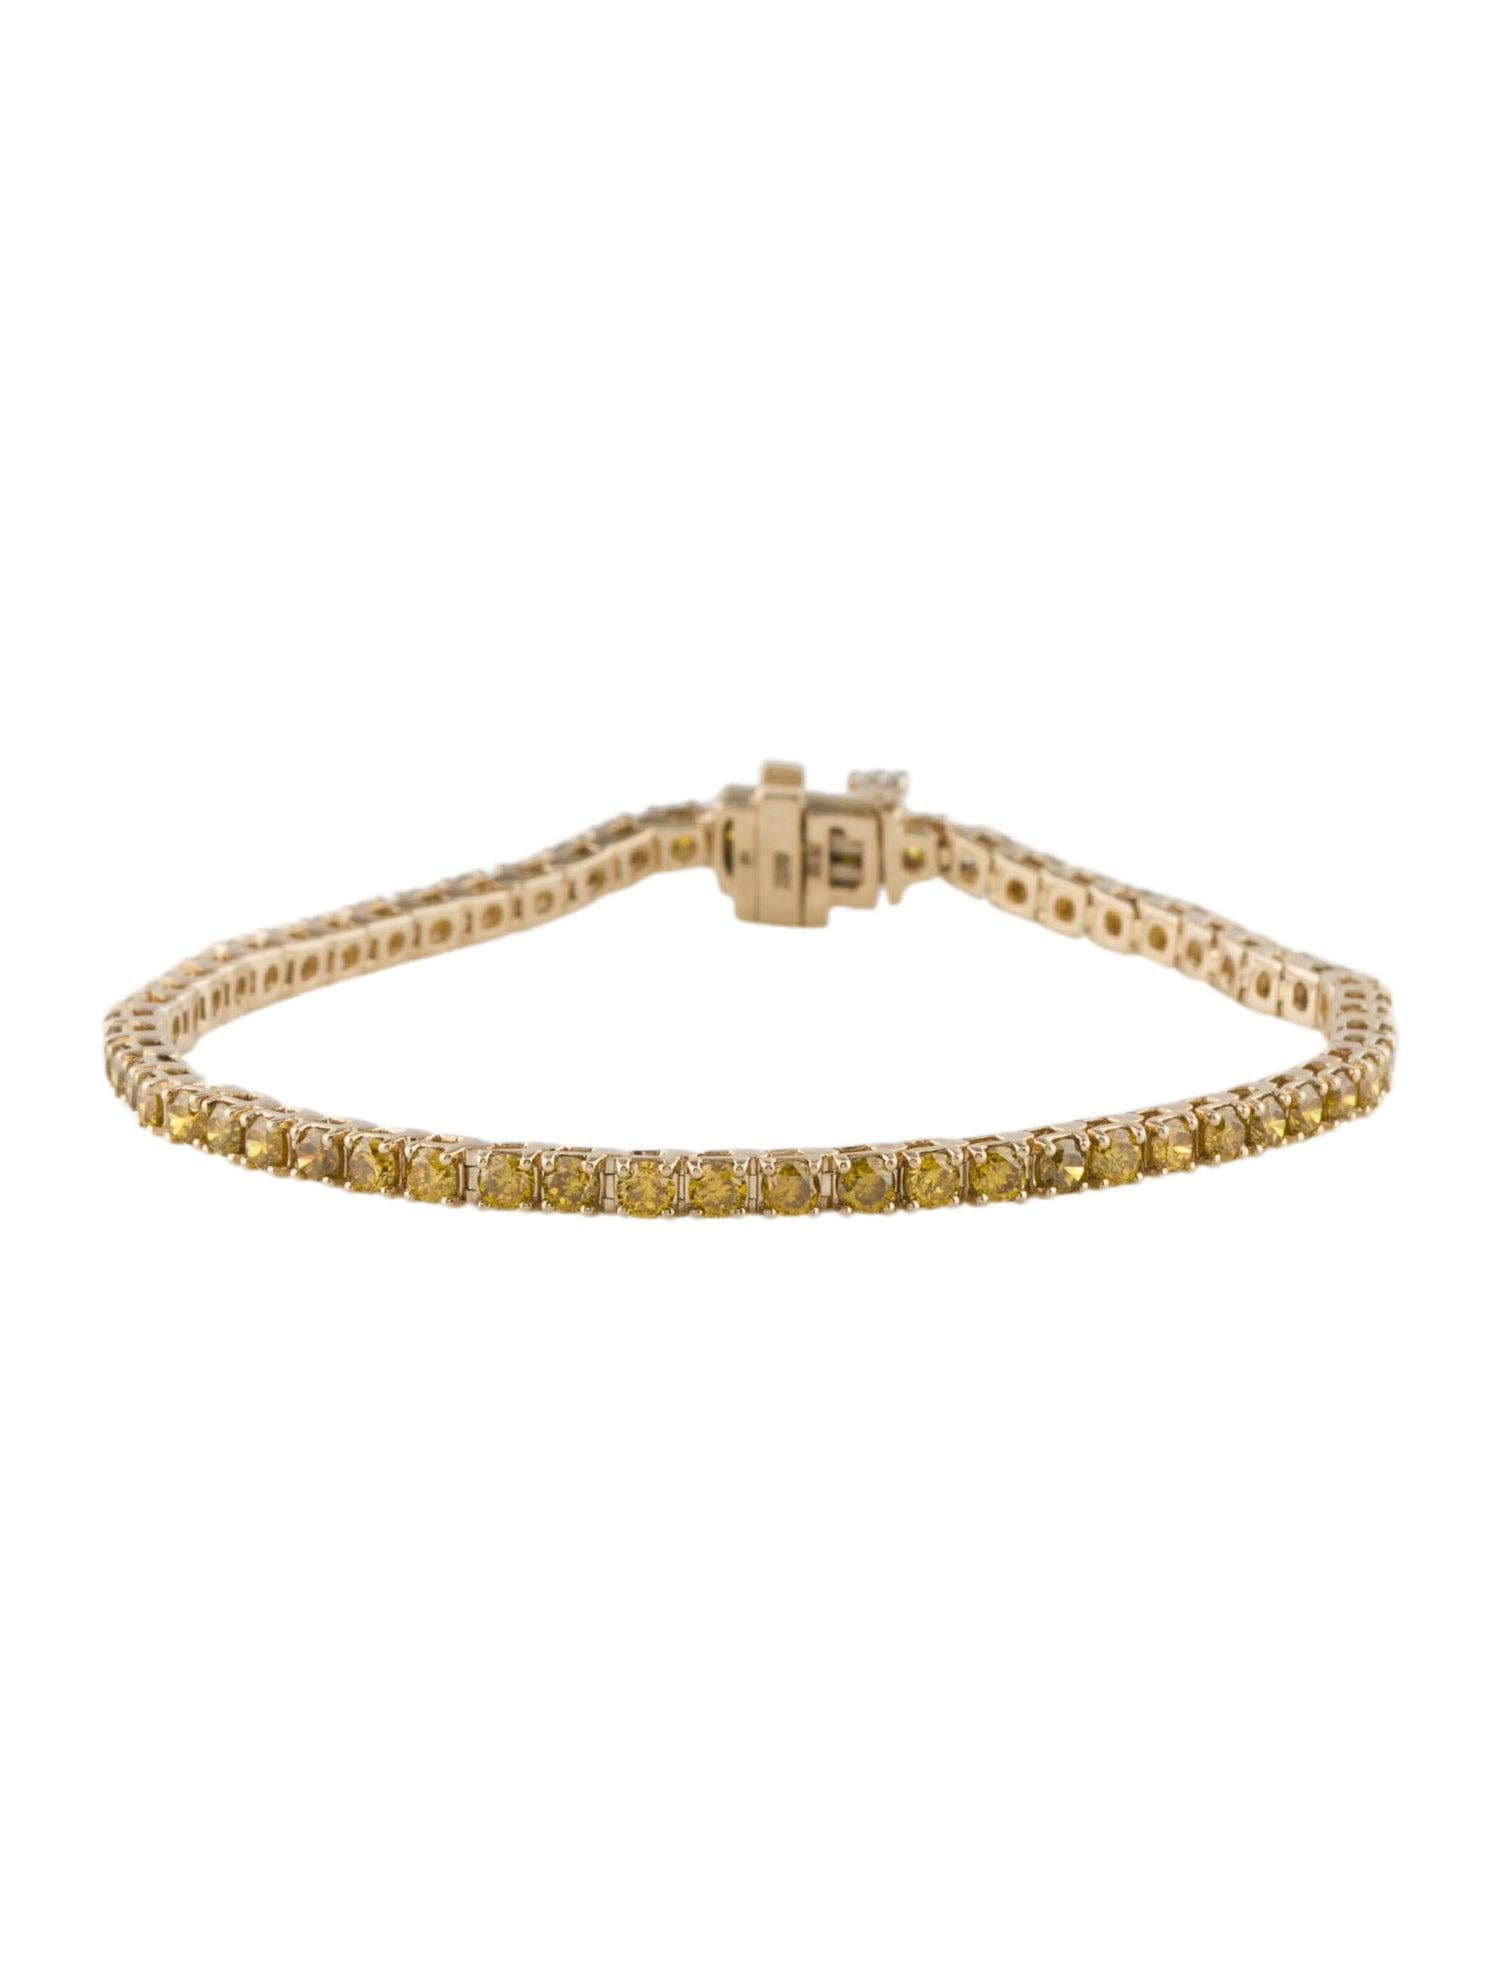 Elevate your wrist with the Radiant Sunshine Yellow Diamond Bracelet from Jeweltique's exquisite collection. Meticulously handcrafted in India, this bracelet is a testament to our dedication to exceptional craftsmanship and the celebration of